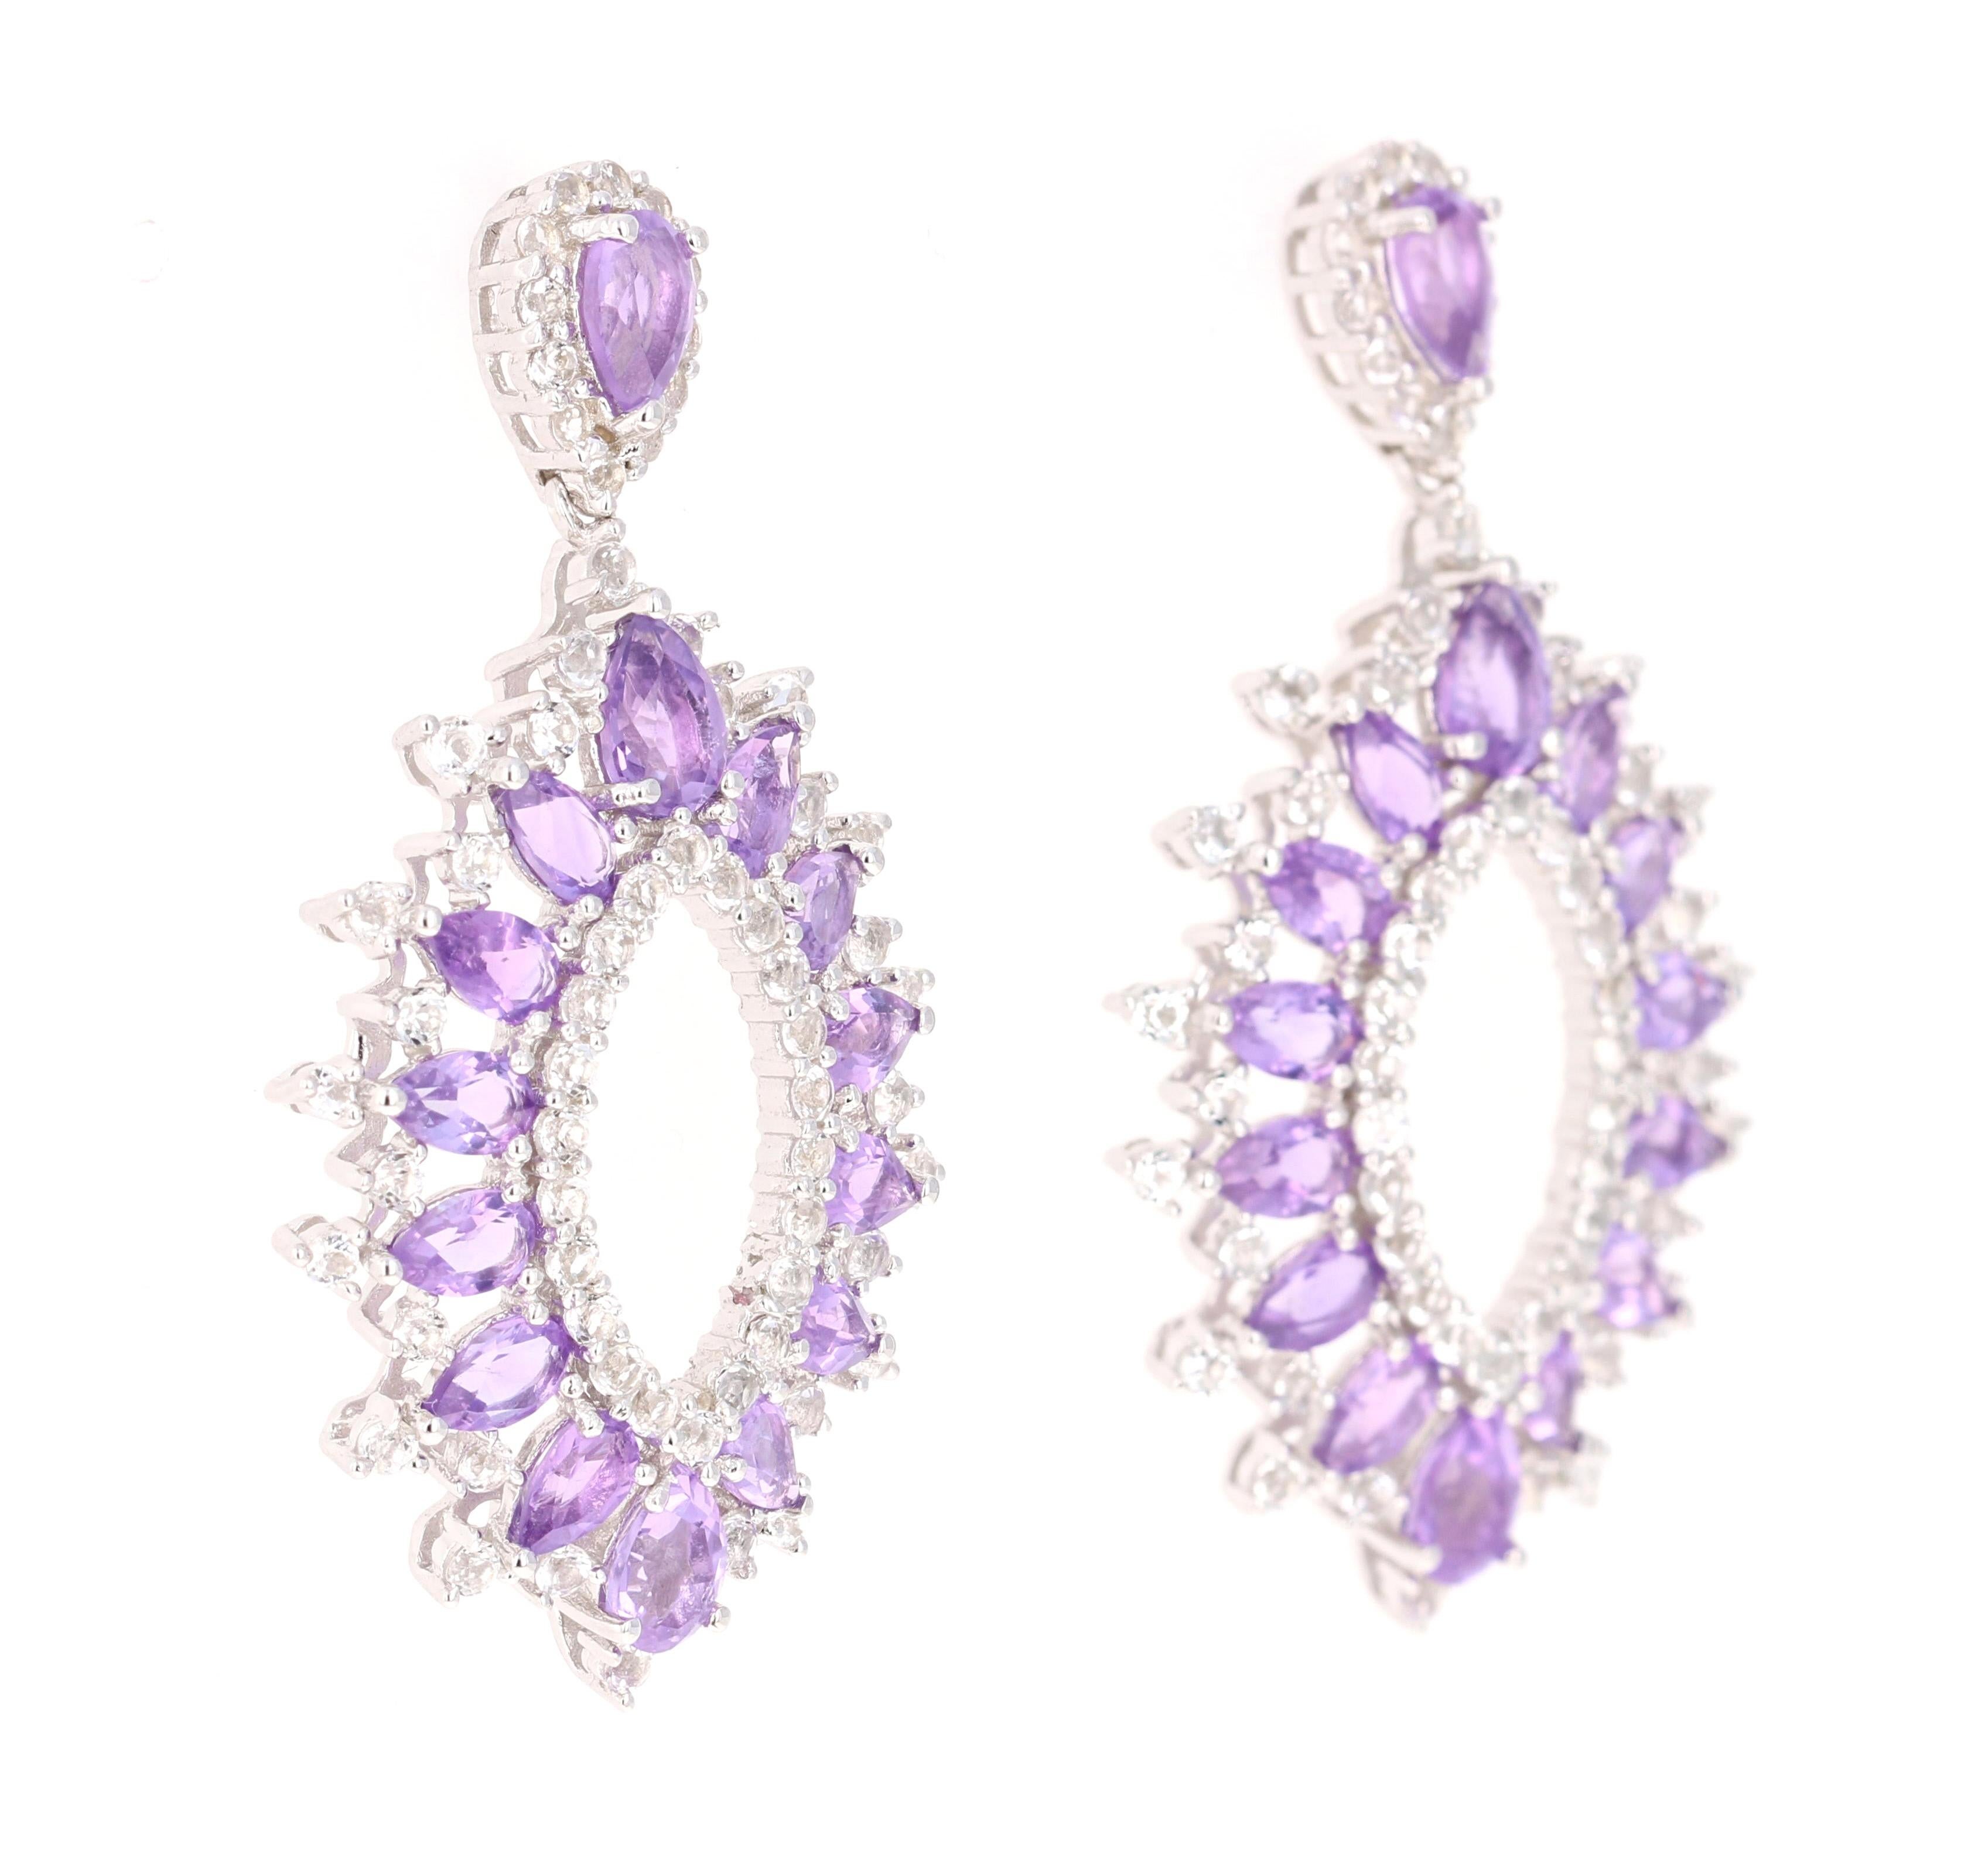 Stunning Chandelier Dangle Earrings 

These earrings have 6.29 Carats of Amethyst and White Topaz.

They are beautifully curated in 925 Silver weighing approximately 11.5 grams 

They are 1.75 inches long. 
